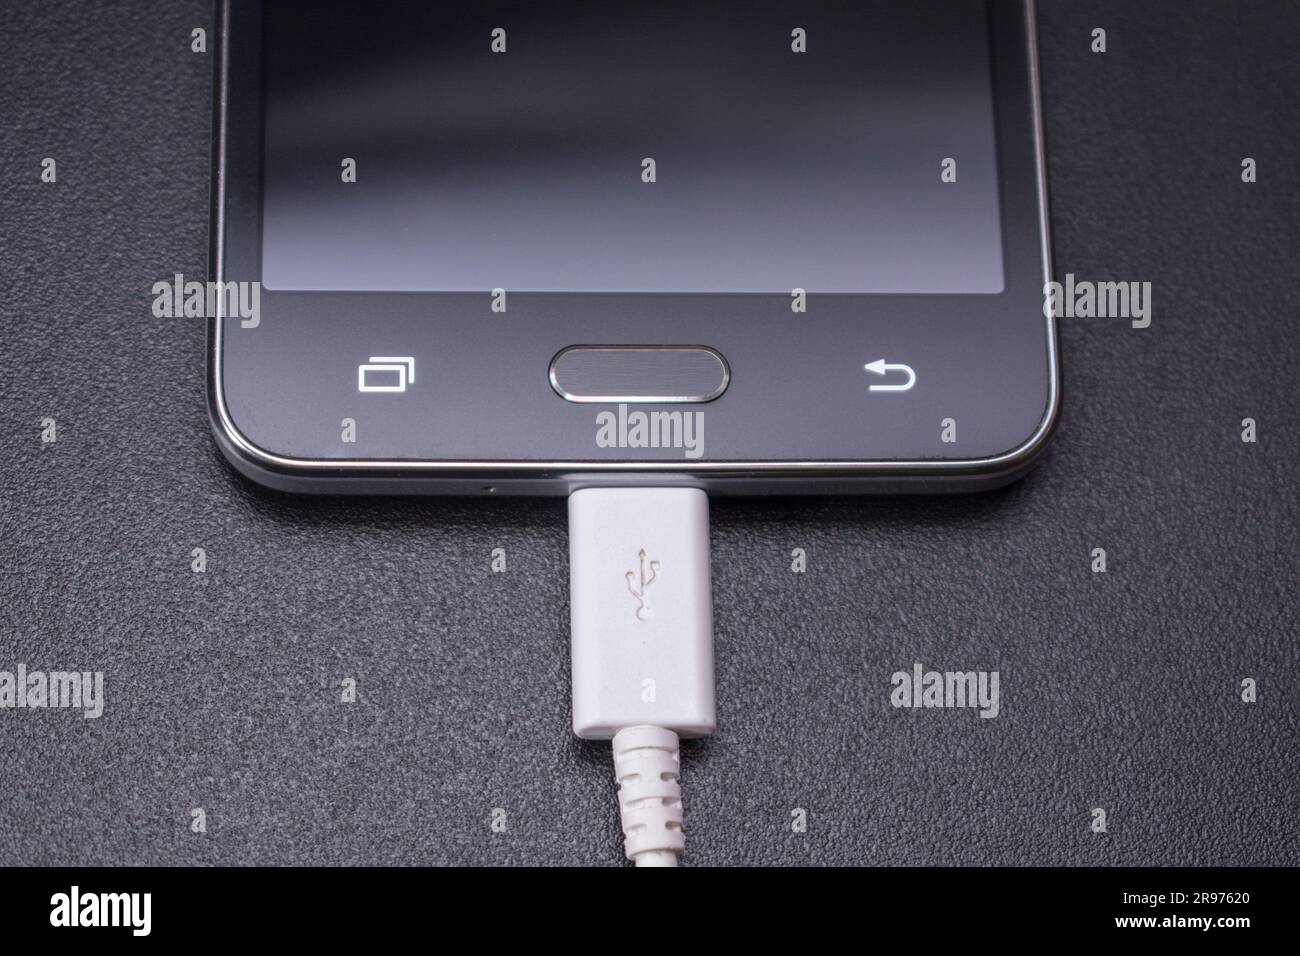 black smartphone on a black matte background with a white connected cable Stock Photo